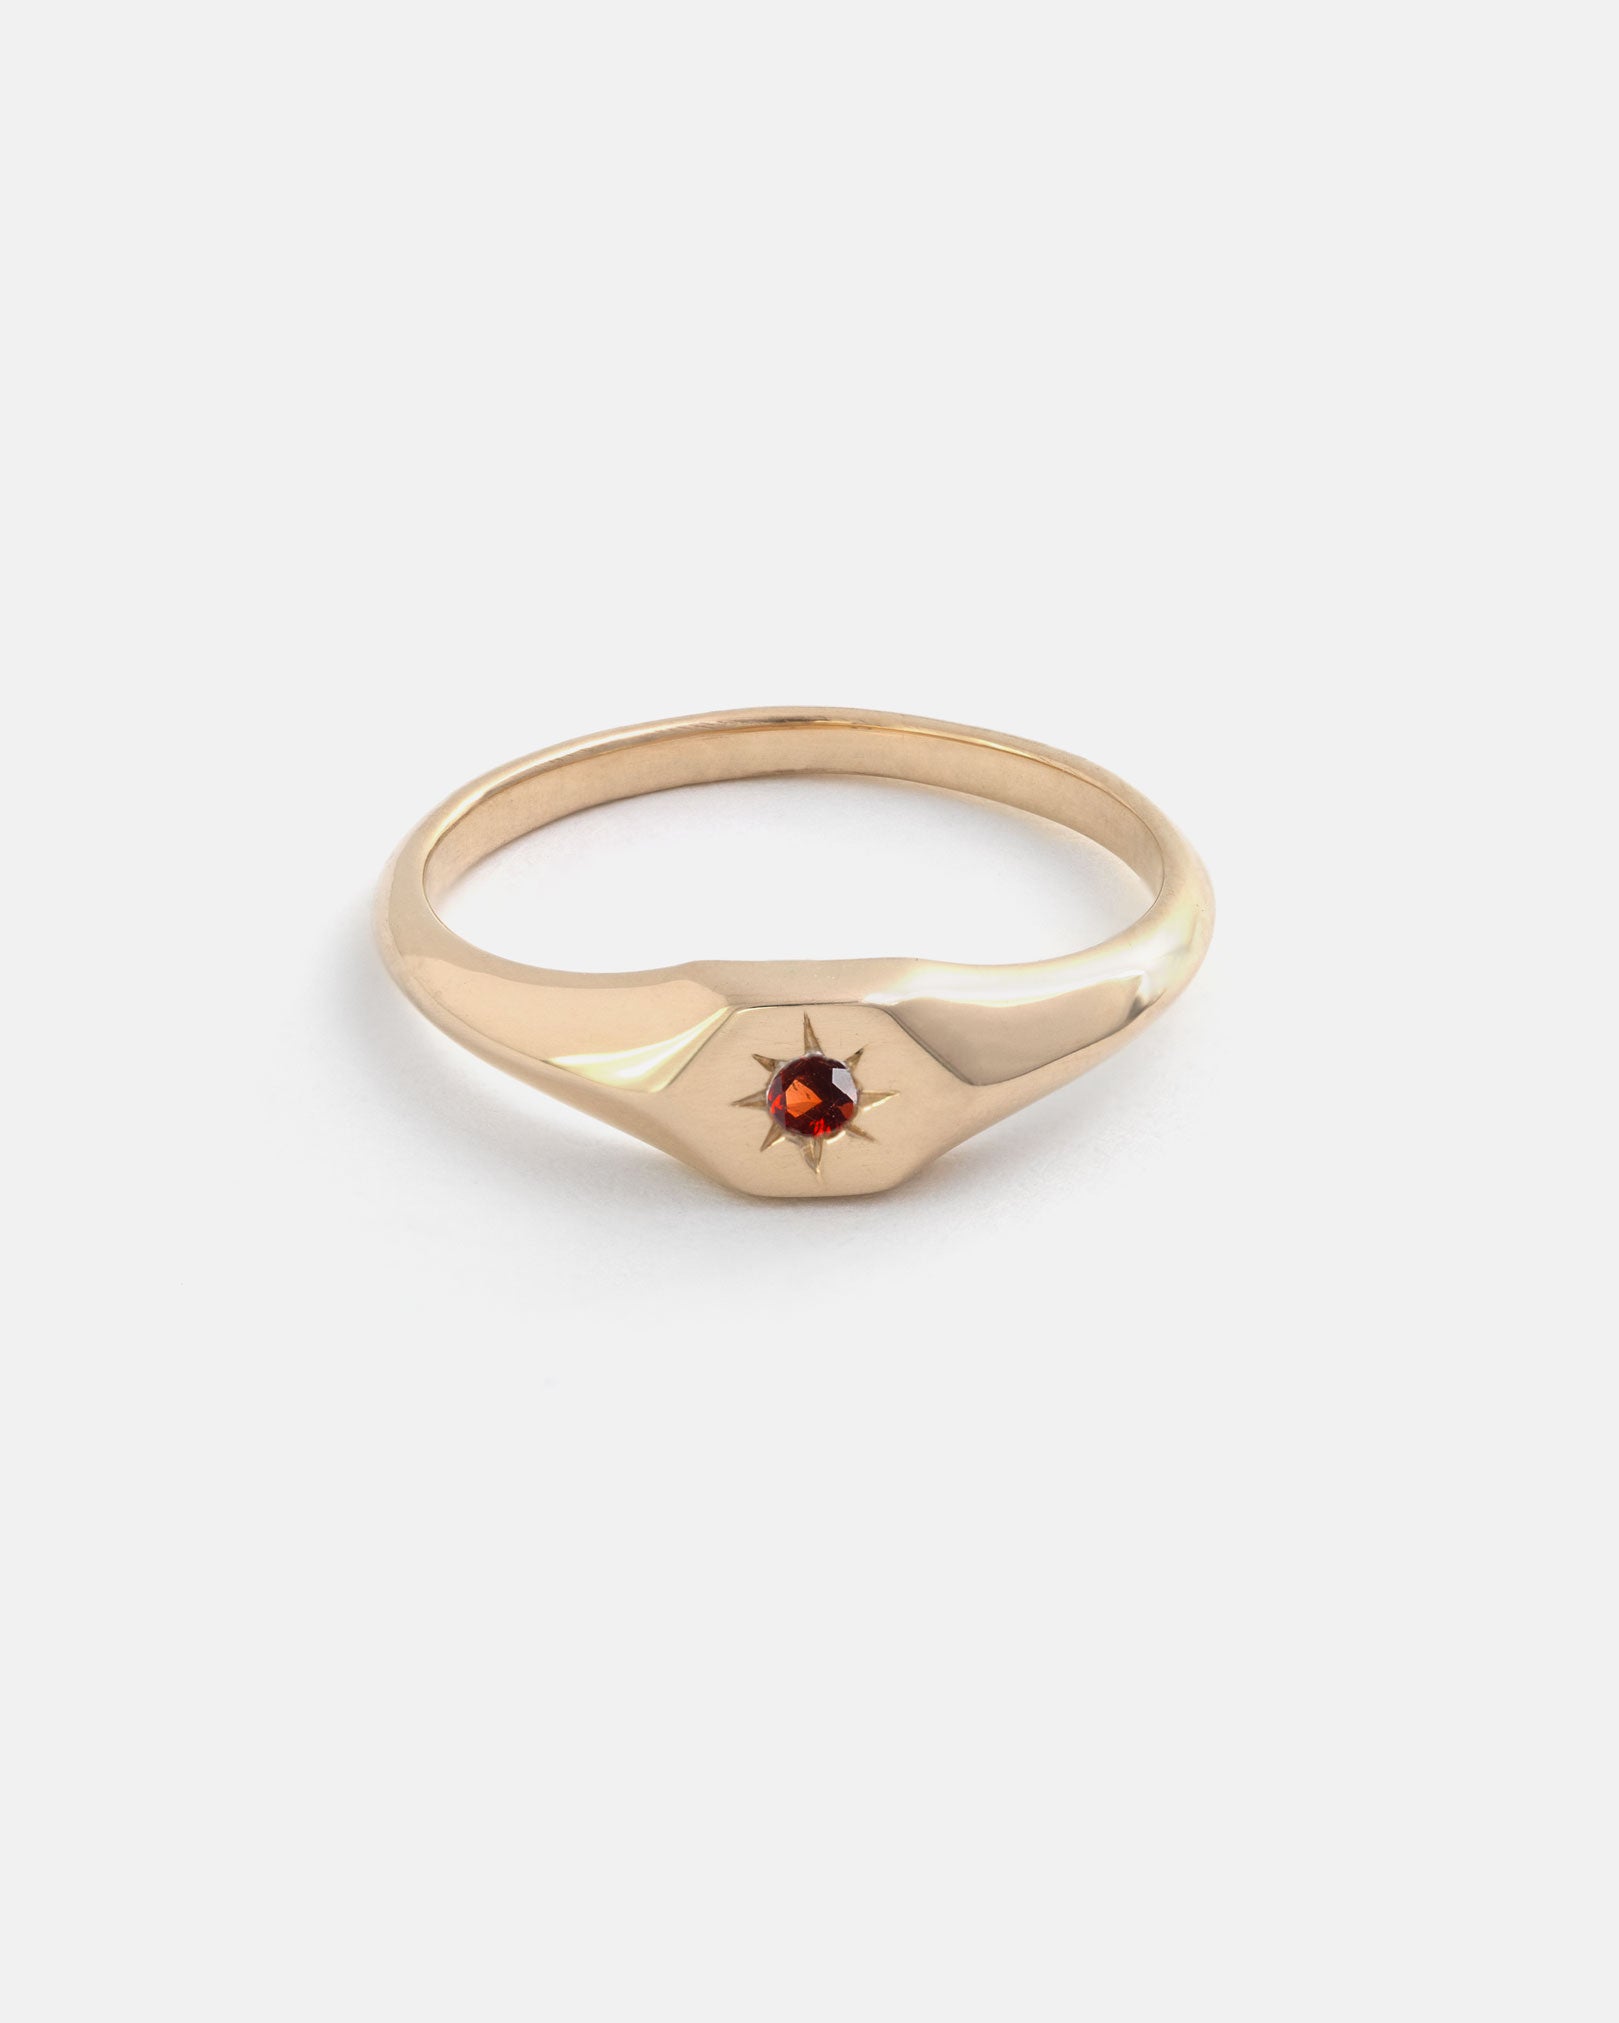 Astrale Ring in 14k Yellow Gold